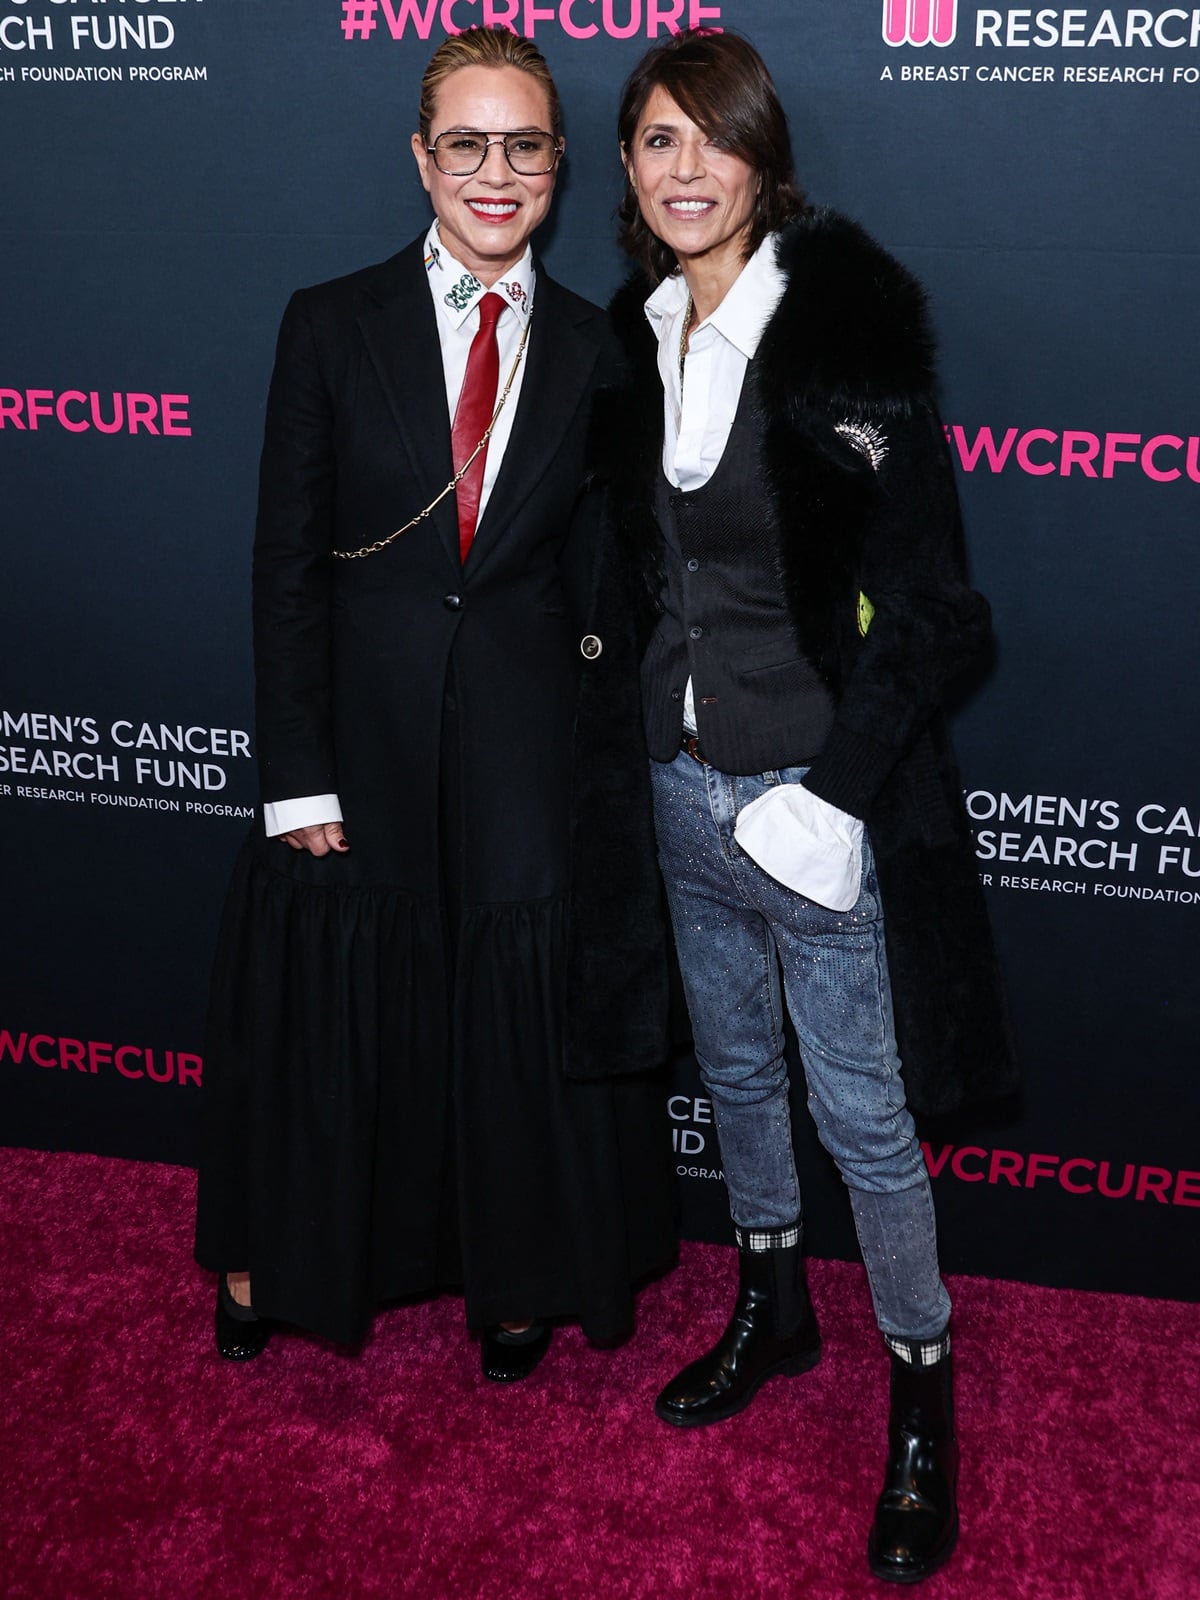 Maria Bello (L) with her girlfriend Dominique Crenn at the Women's Cancer Research Fund's An Unforgettable Evening Benefit Gala